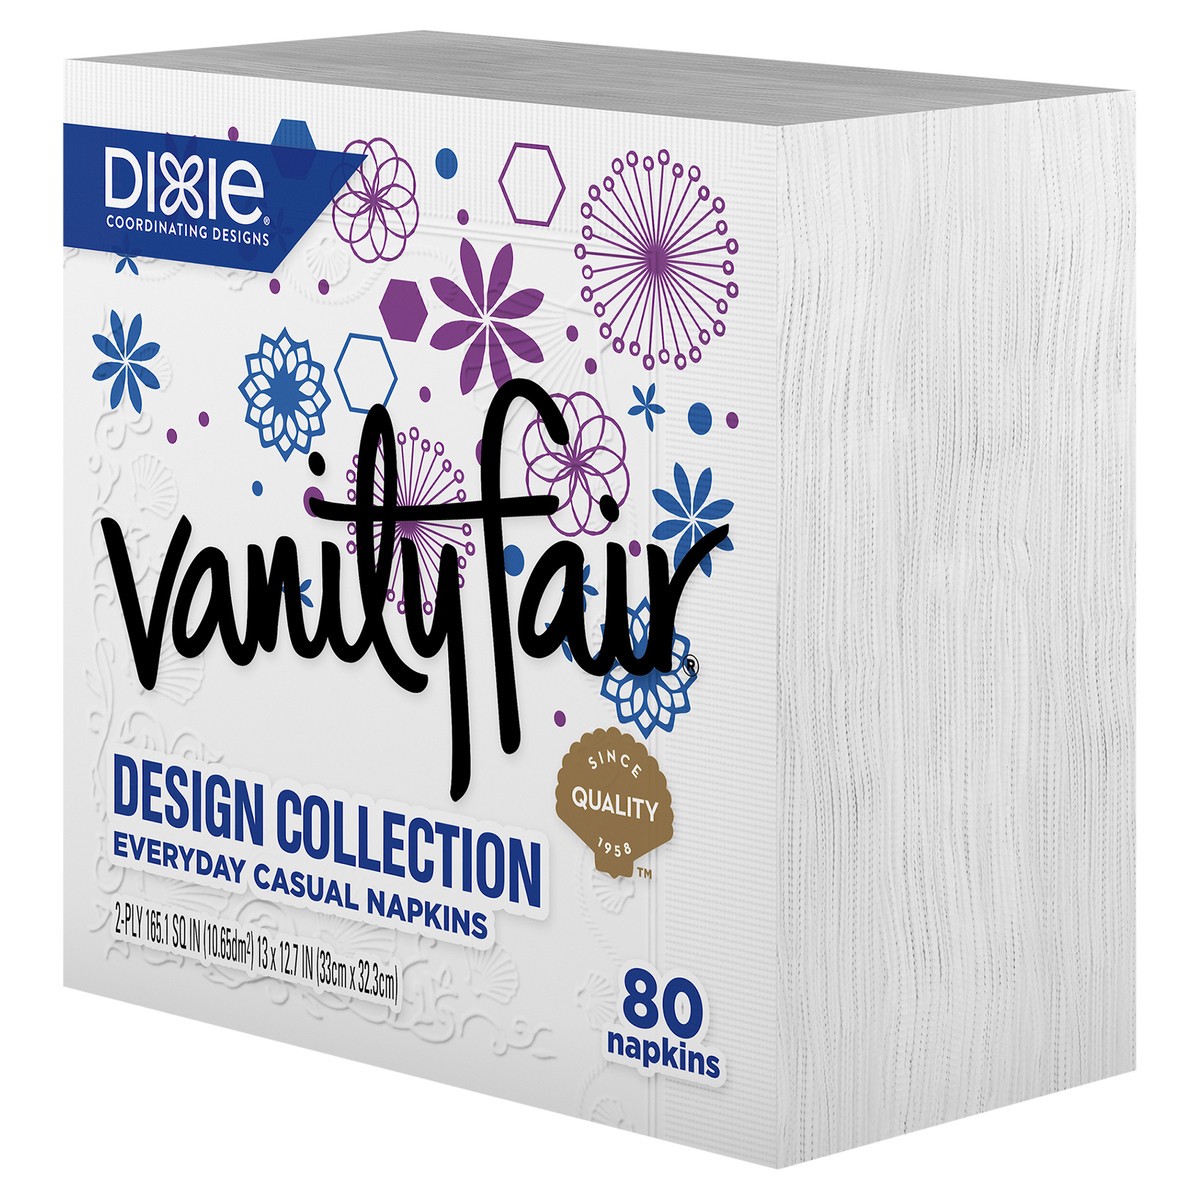 slide 6 of 6, Vanity Fair 2-Ply Design Collection Everyday Casual Napkins 80 ea, 80 ct